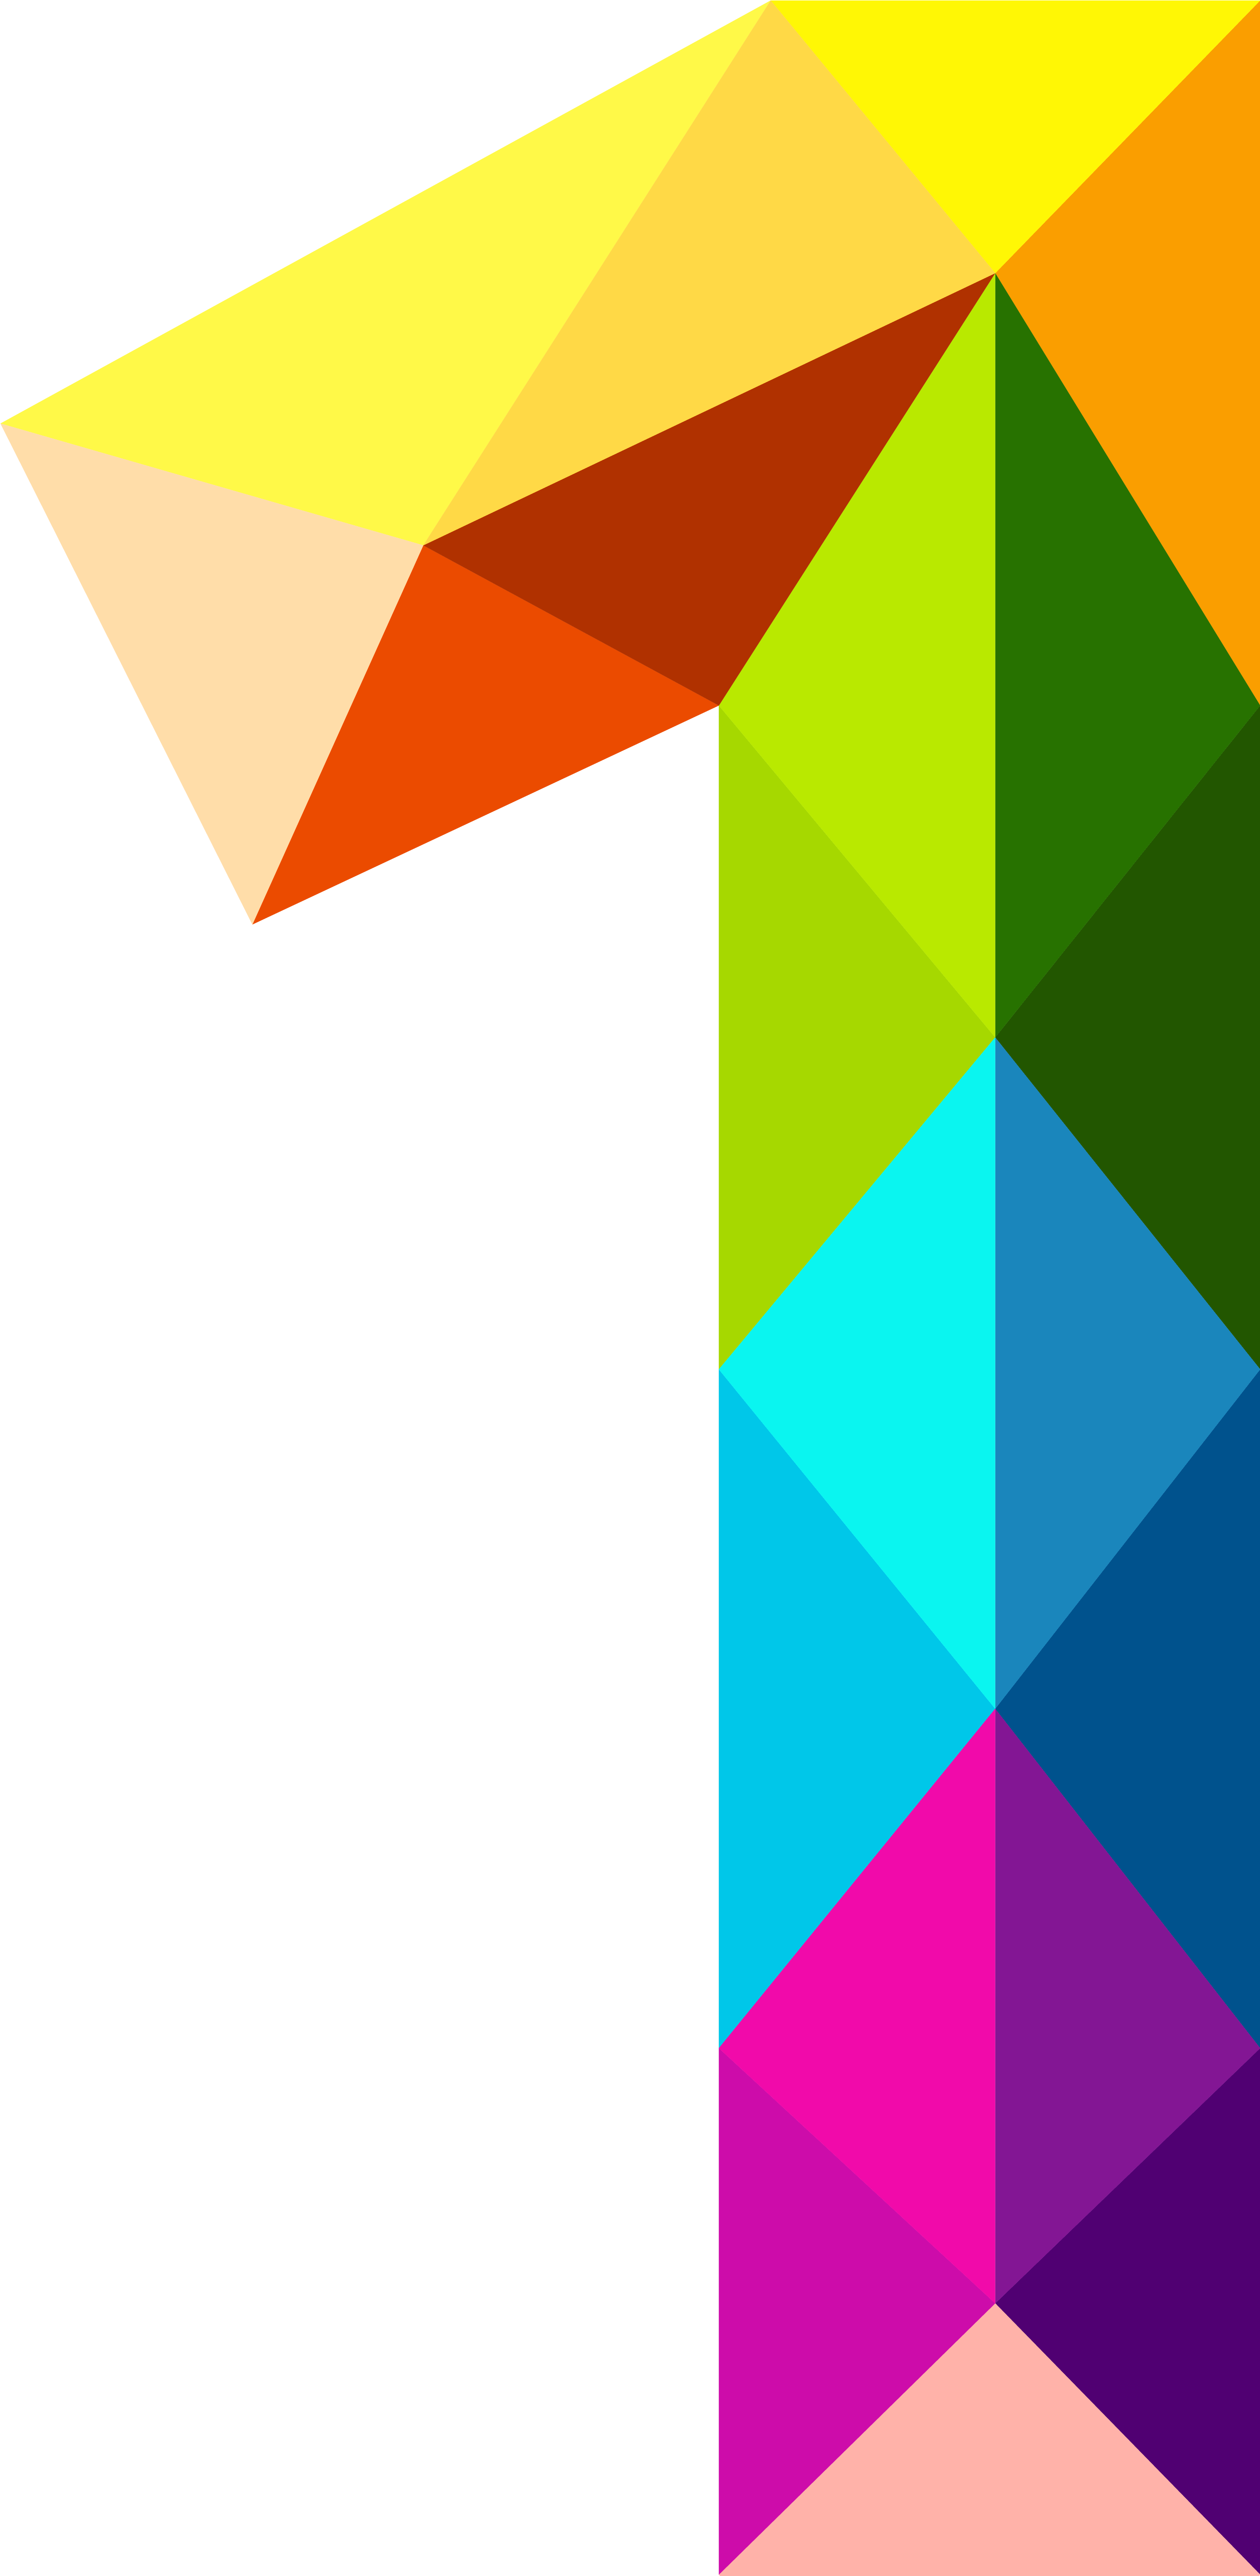 A Colorful Triangle Shaped Object